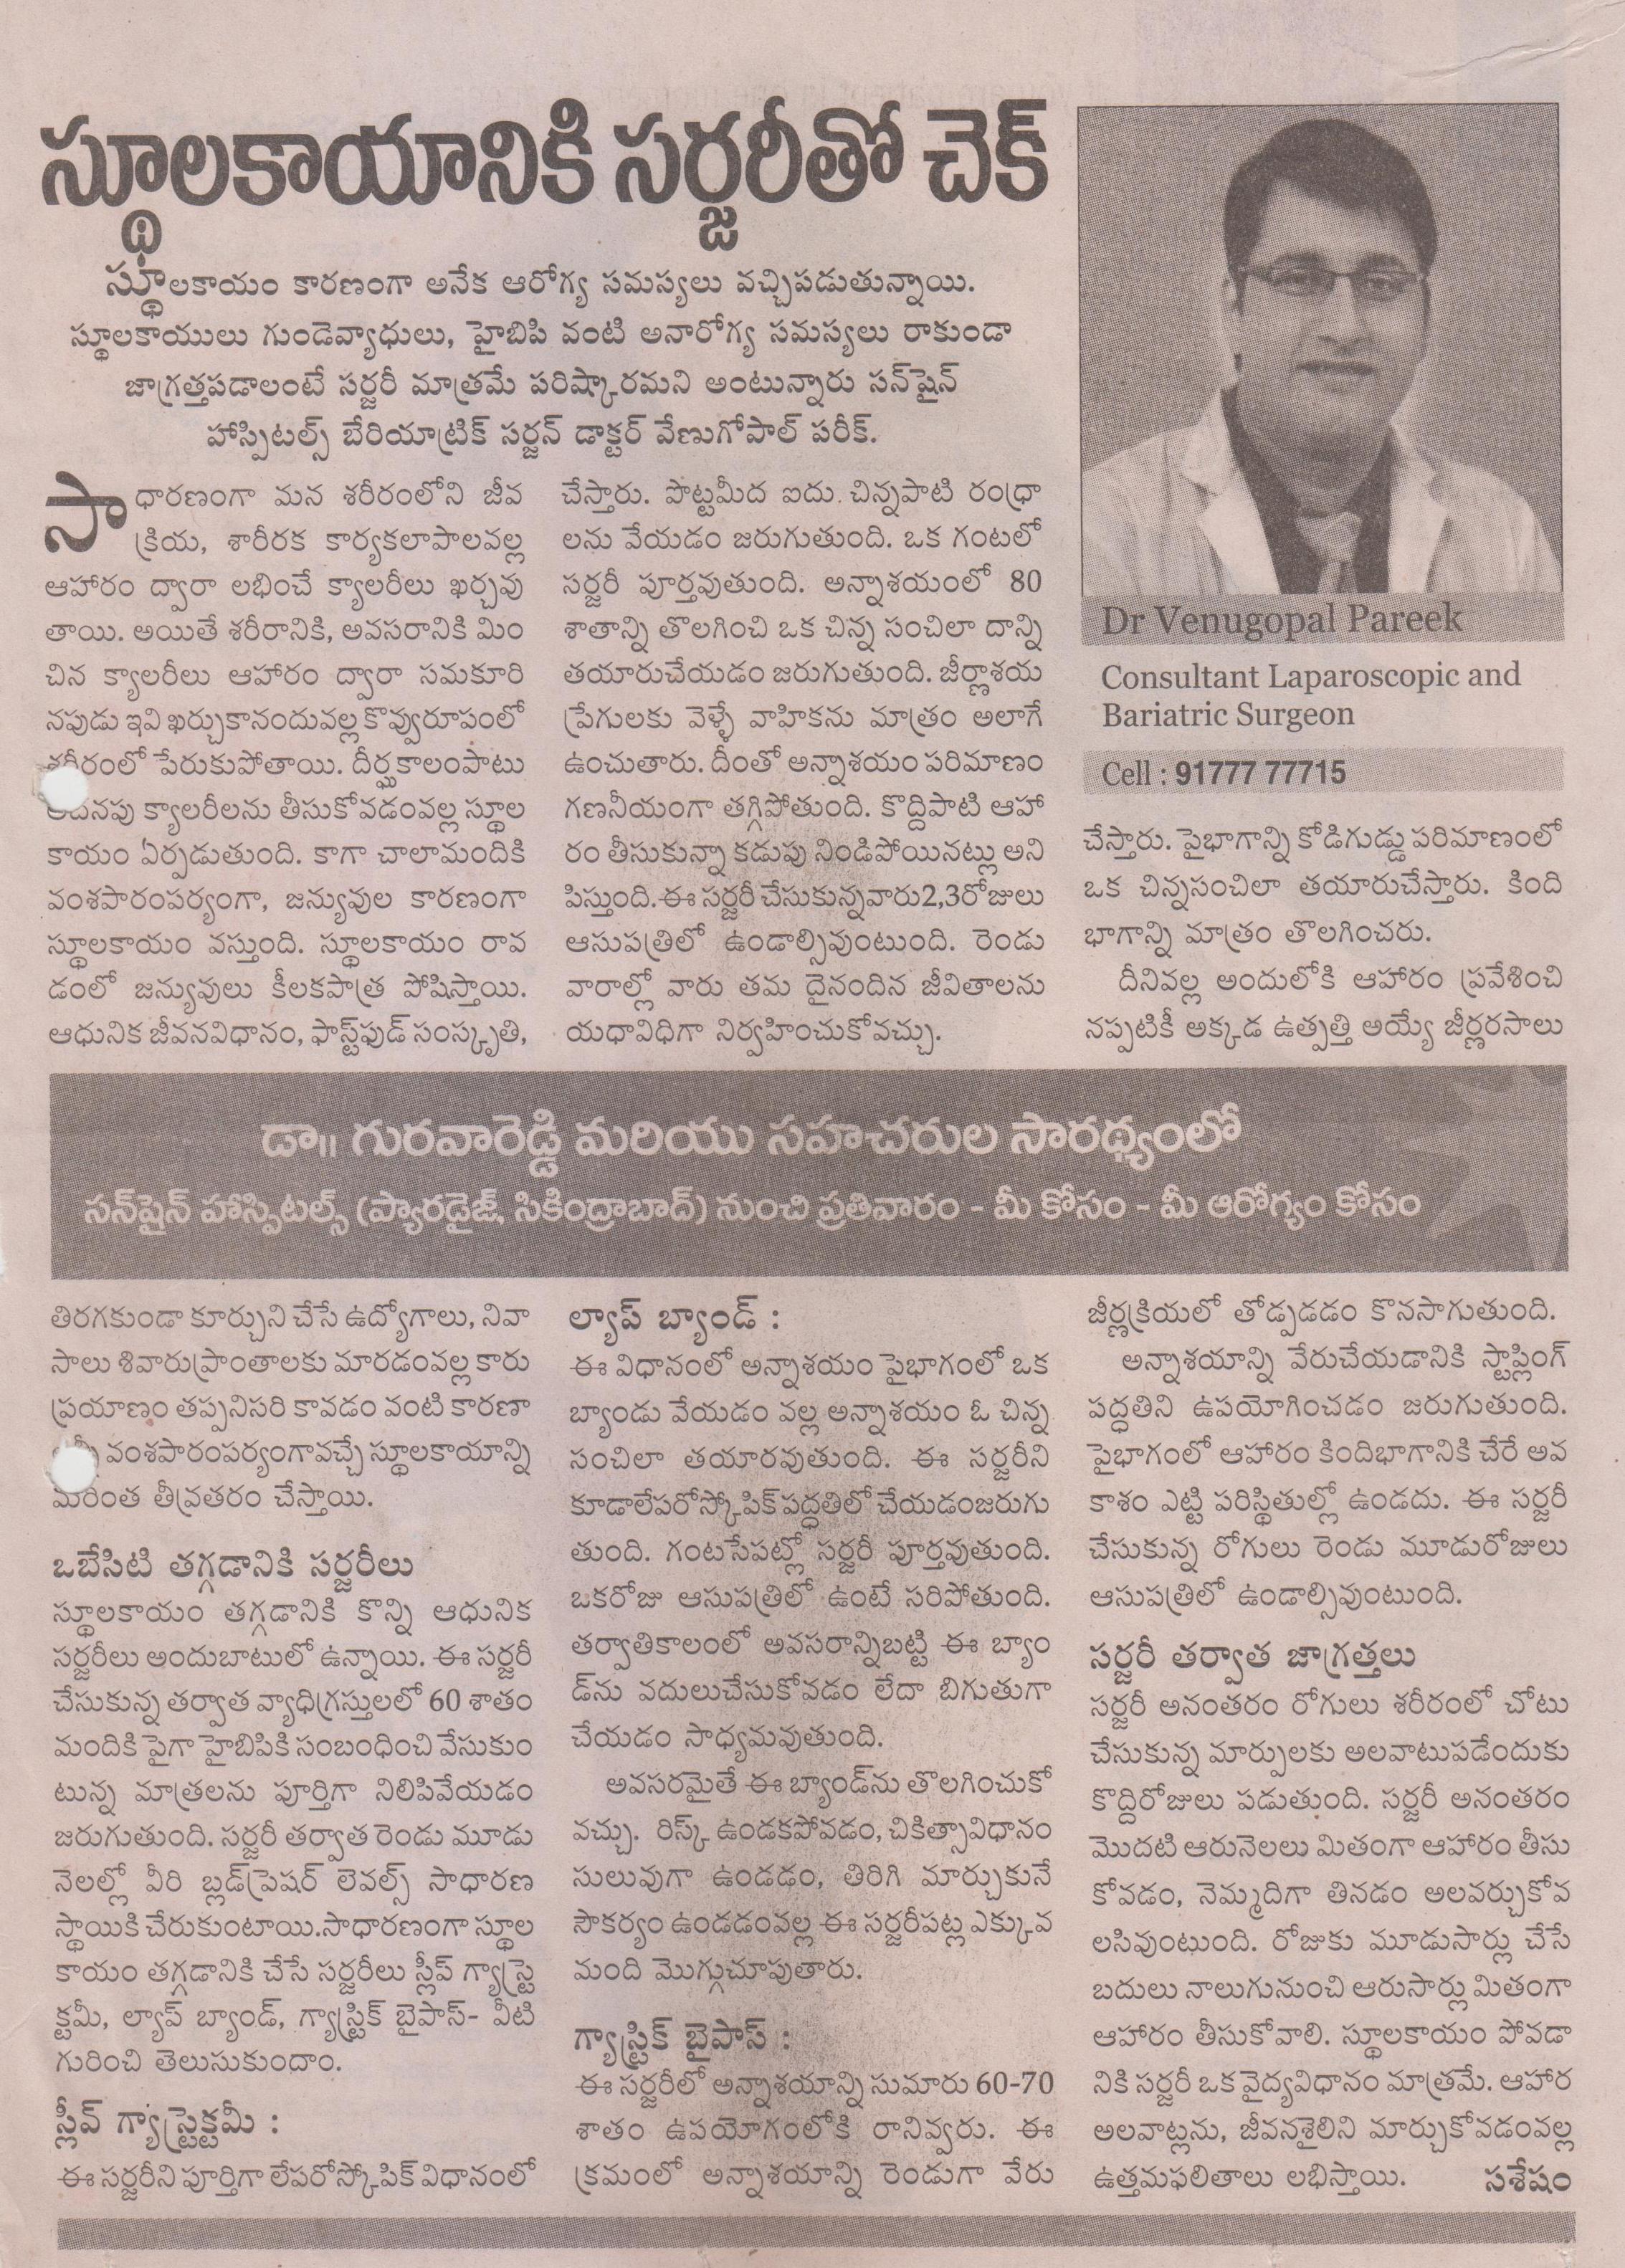 Surgical obesity treatment explained in Telugu newspaper by Dr V Pareek, Best weight loss lap surgeon Hyderabad